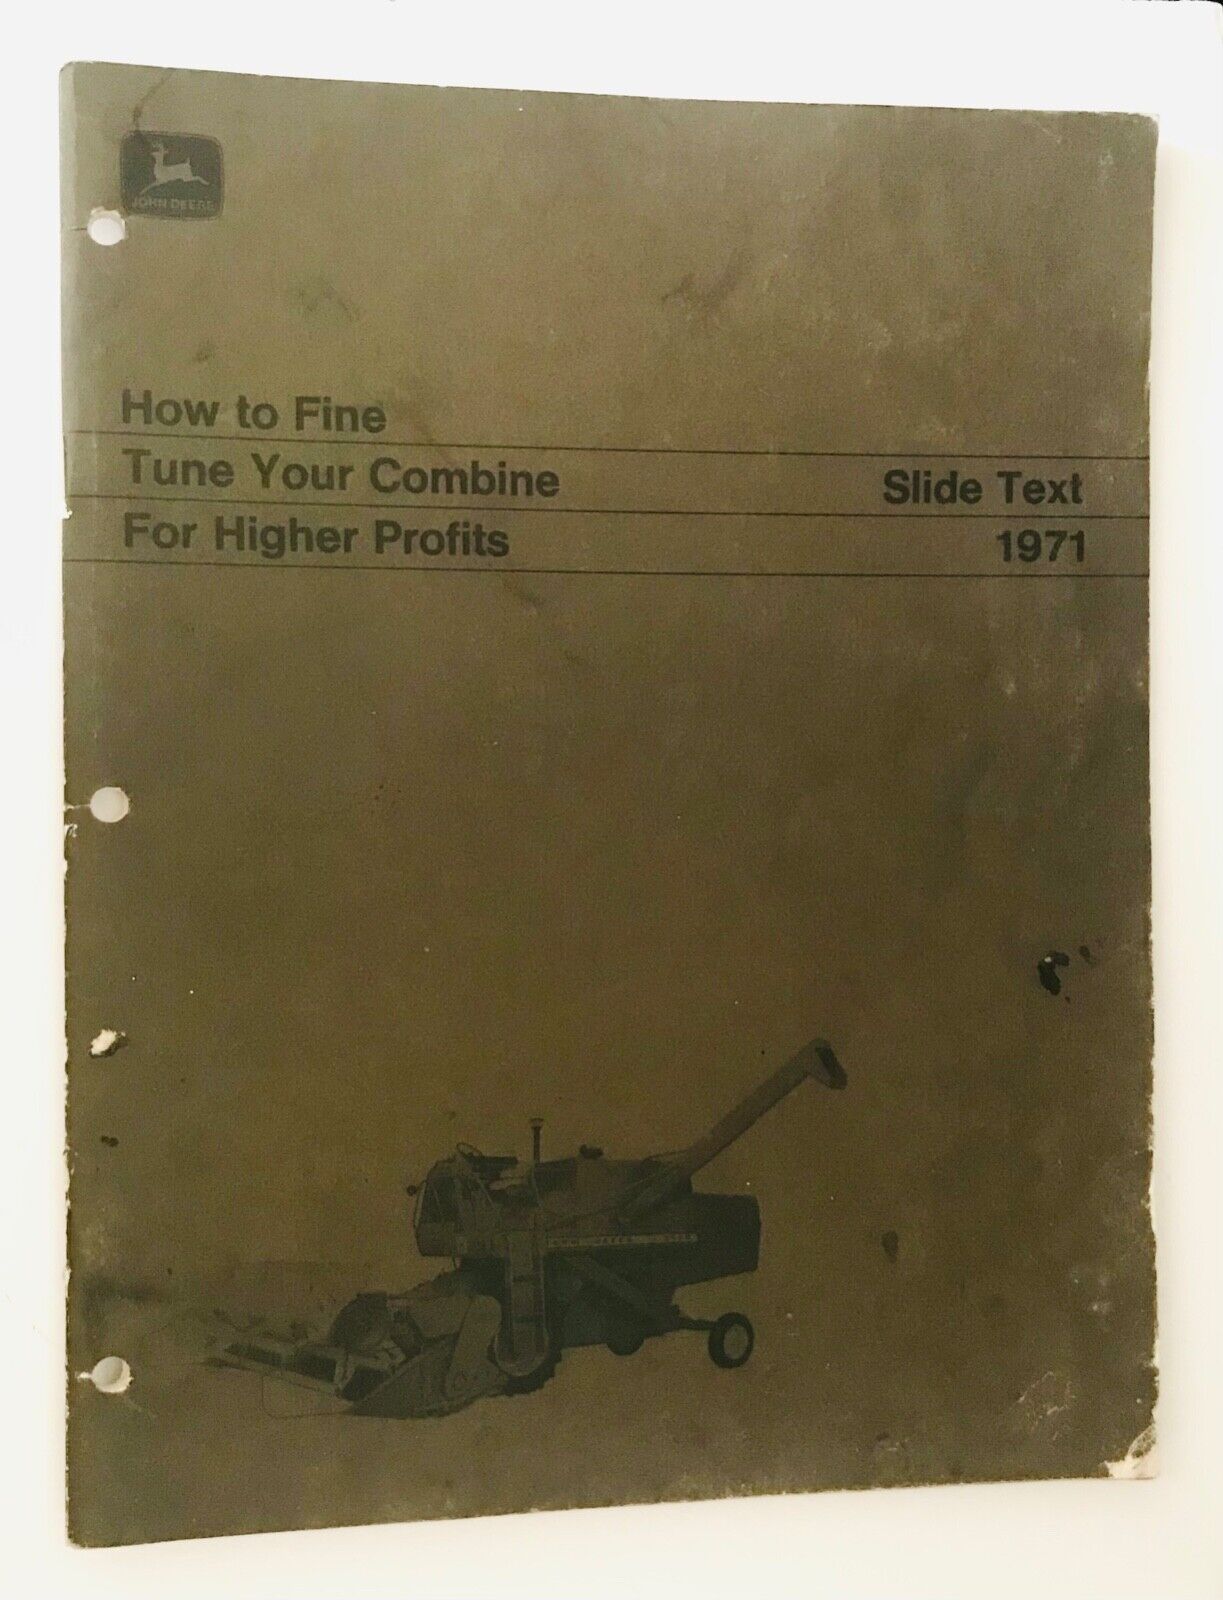 1971 John Deere How to Fine Tune Your Combine for Higher Profits Slide Text Book